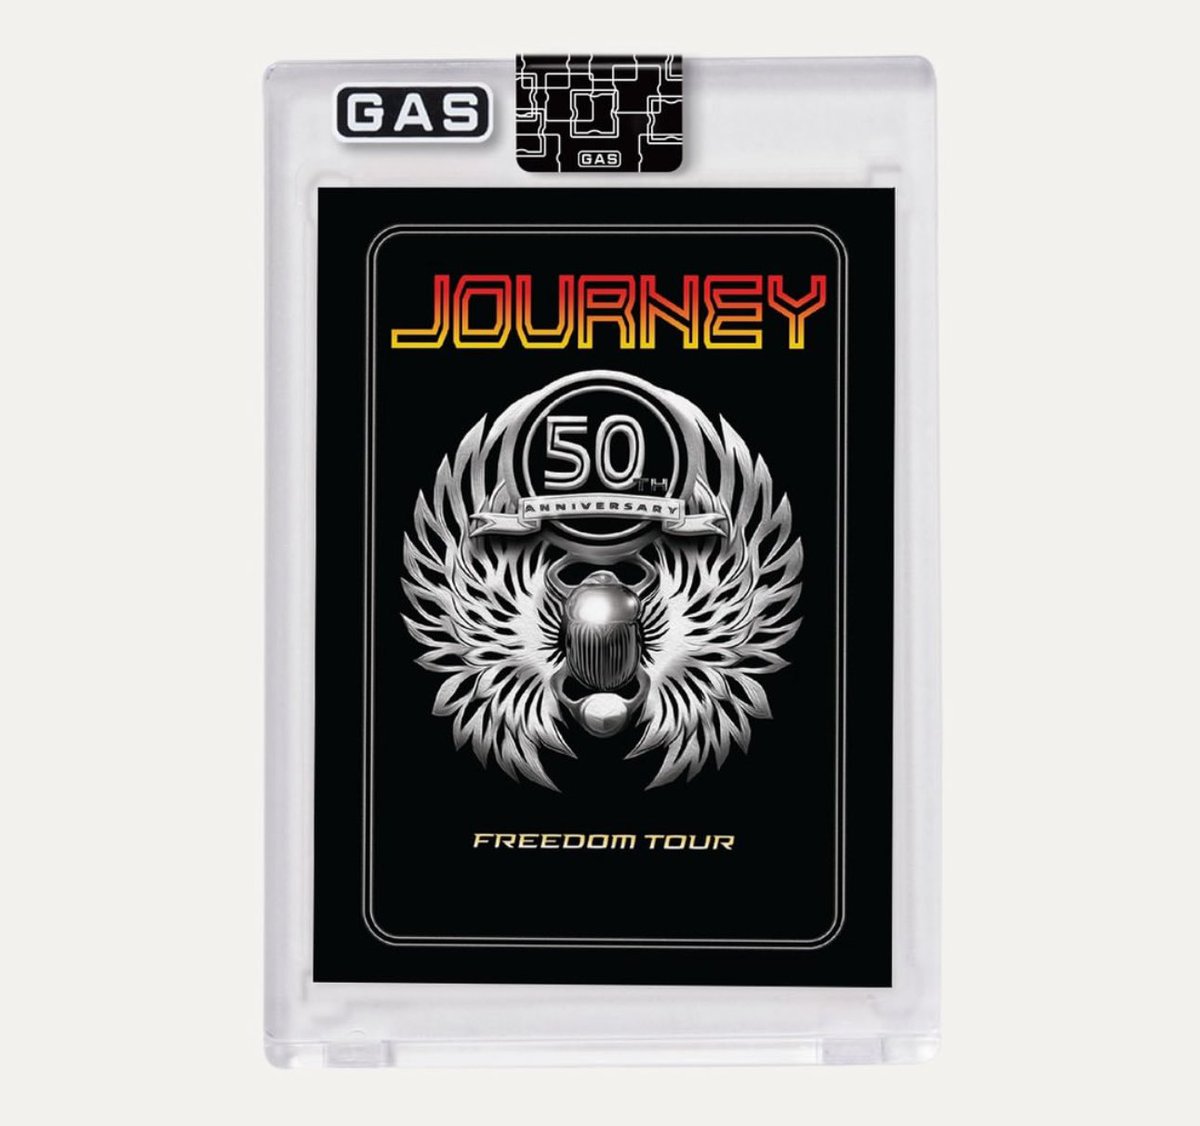 GAS is proud to present the @JourneyOfficial 50th Anniversary Freedom Tour Trading Card, available exclusively in-person at each show! #journey #journeyband #freedomtour #tradingcards